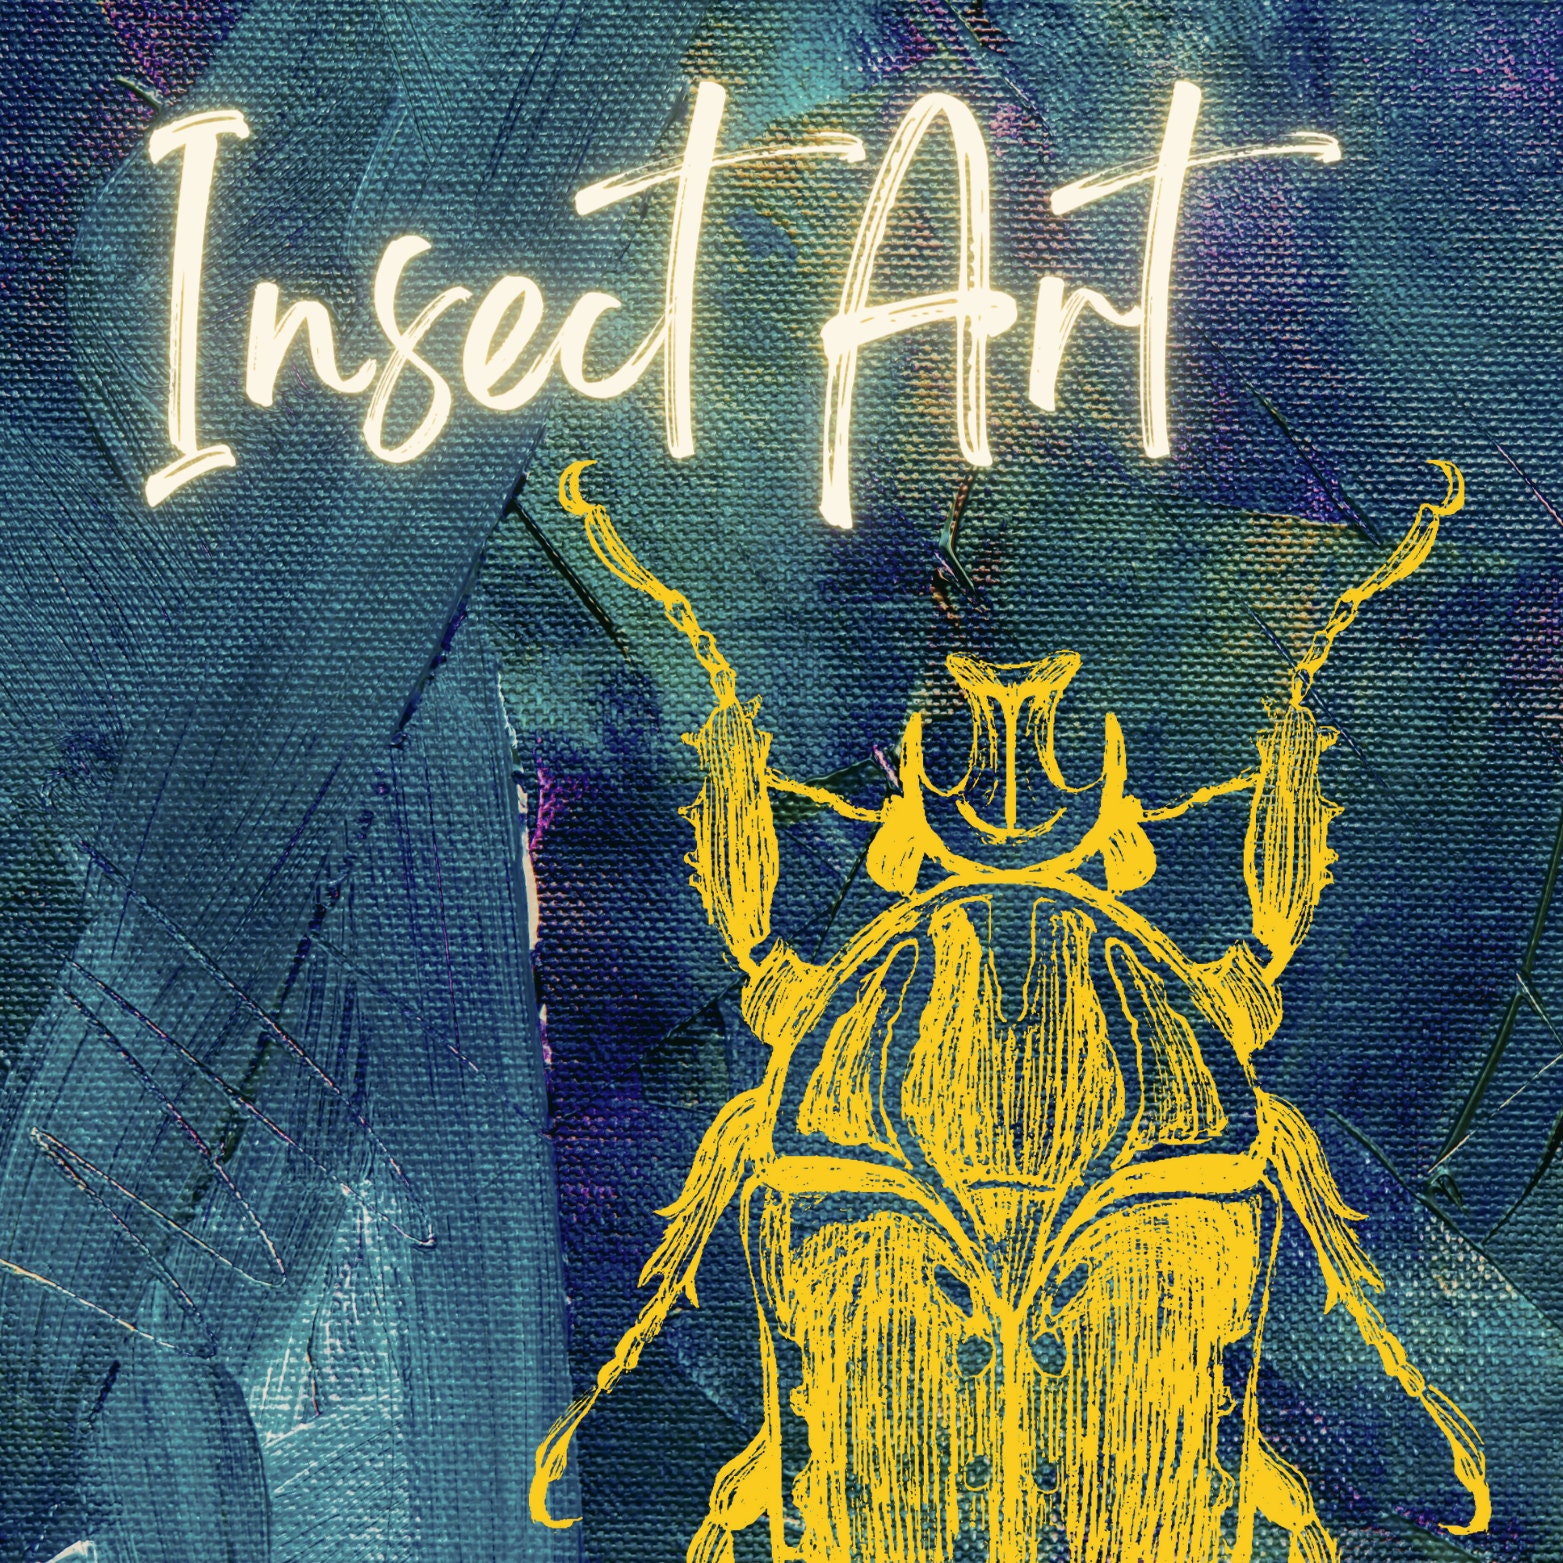 InsectArt 